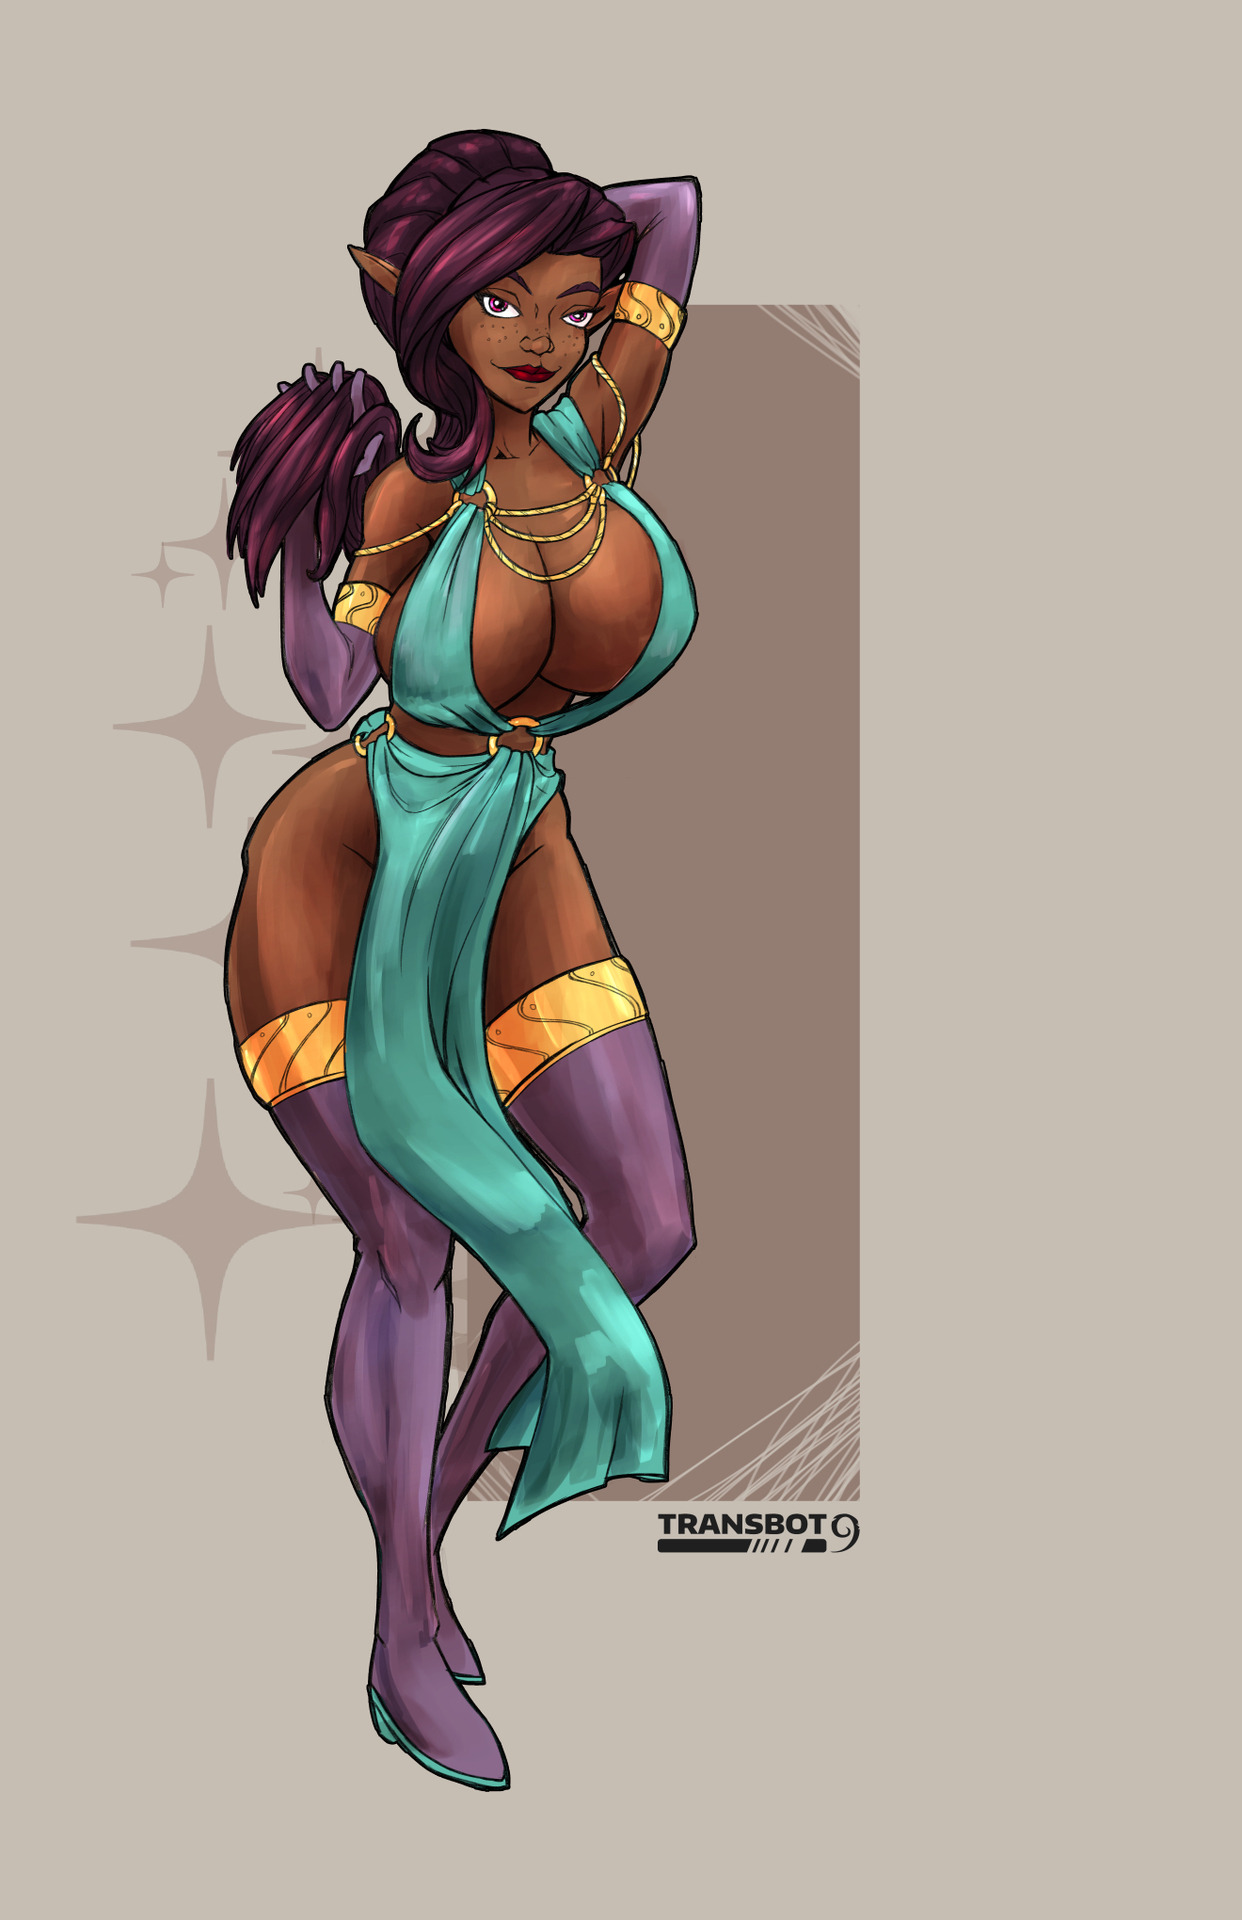 therealfunk: transbot9art: @therealfunk‘s  Vanessa. Been following for a while.